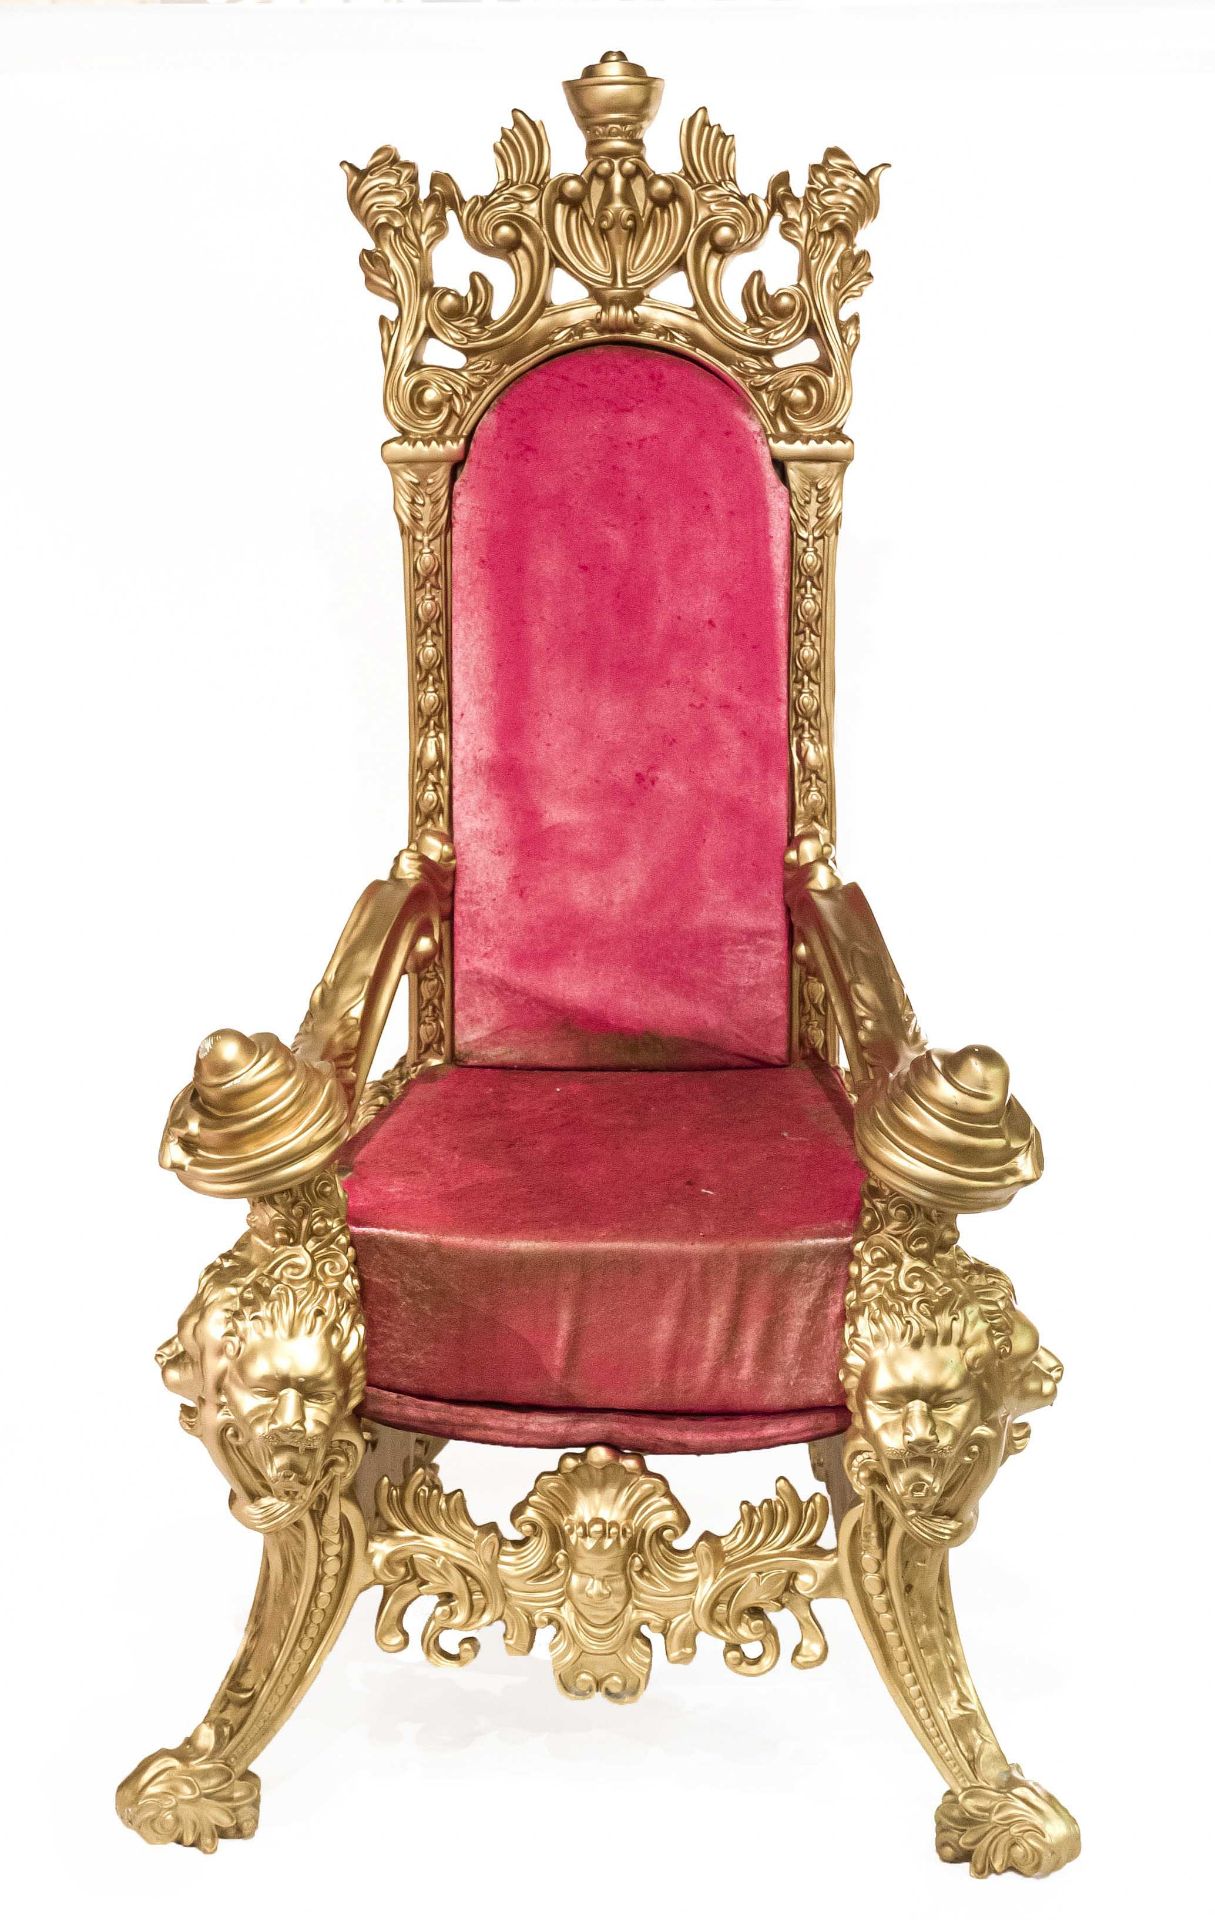 Magnificent Baroque-style throne armchair, 20th century, carved and gilded wood, carved lion's - Image 2 of 5